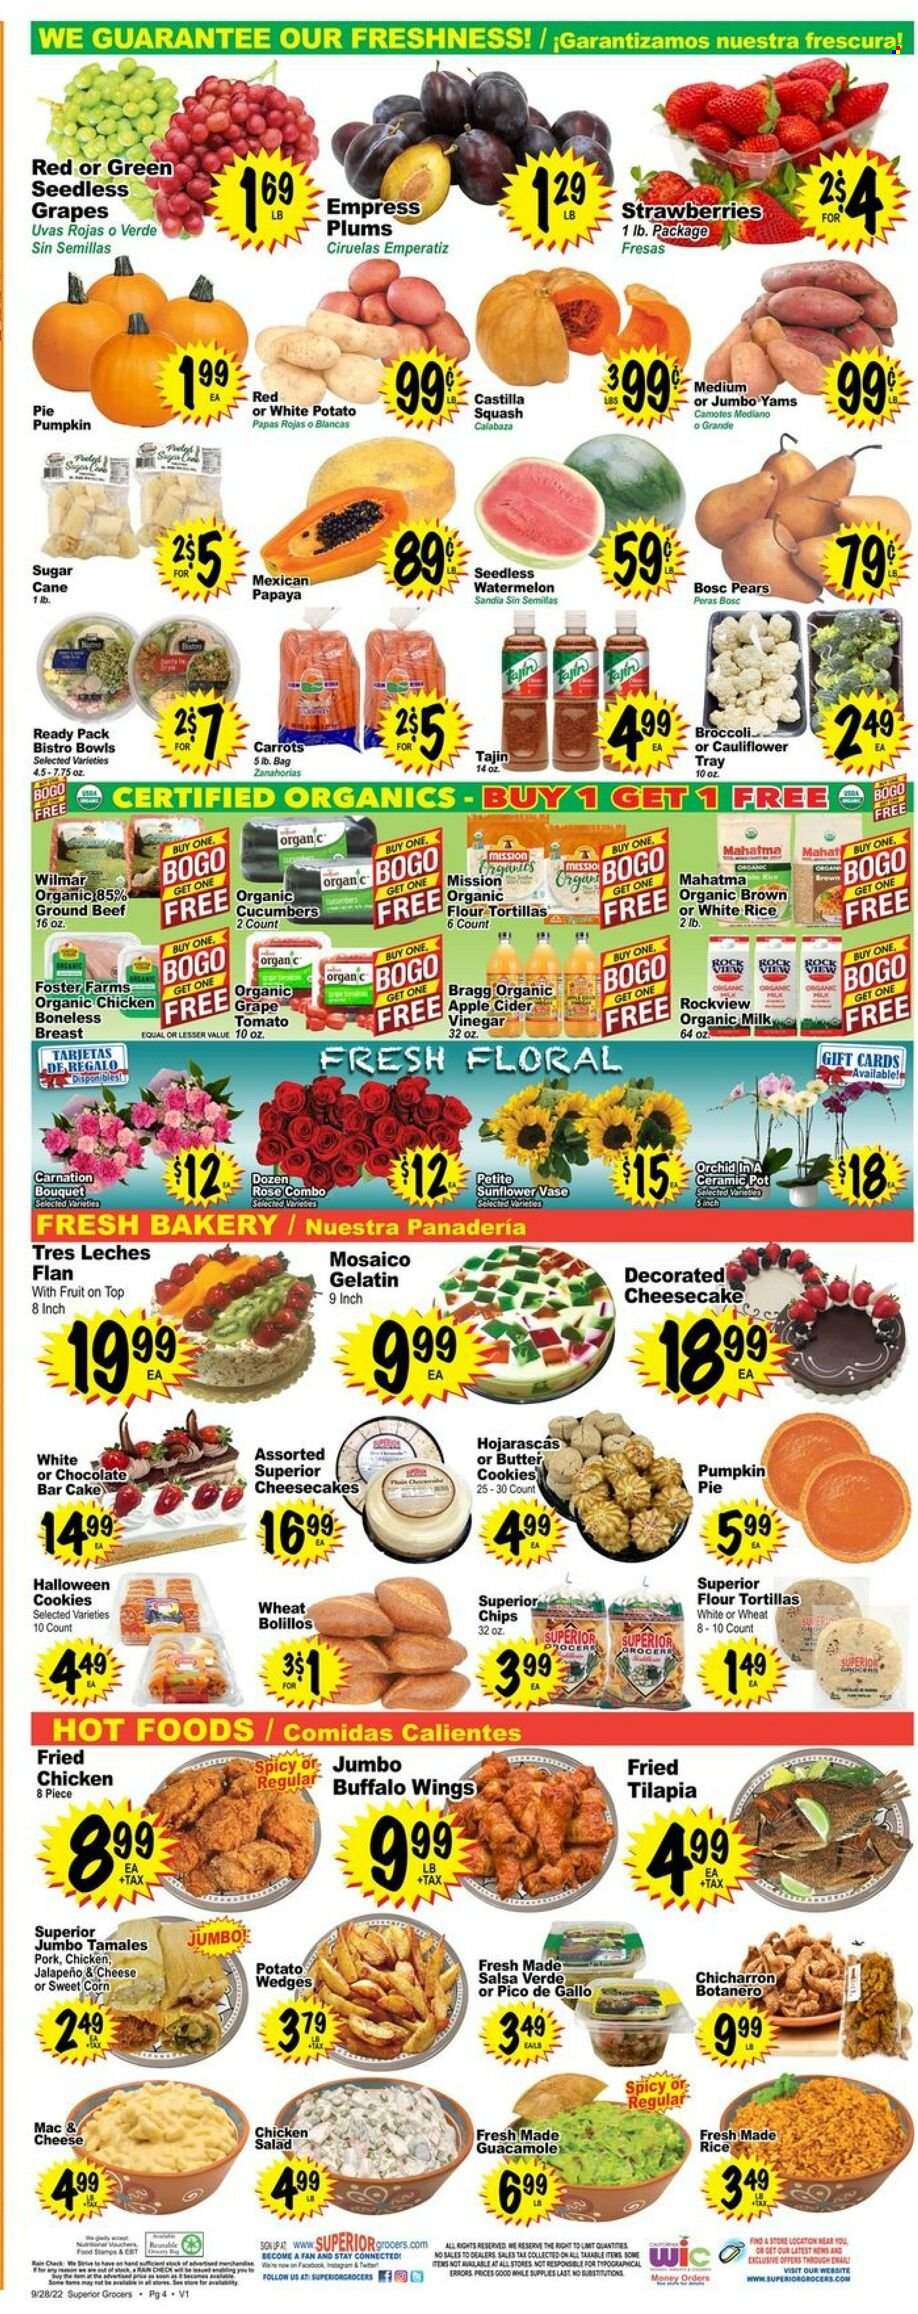 Superior Grocers ad  - 09.28.2022 - 10.04.2022.